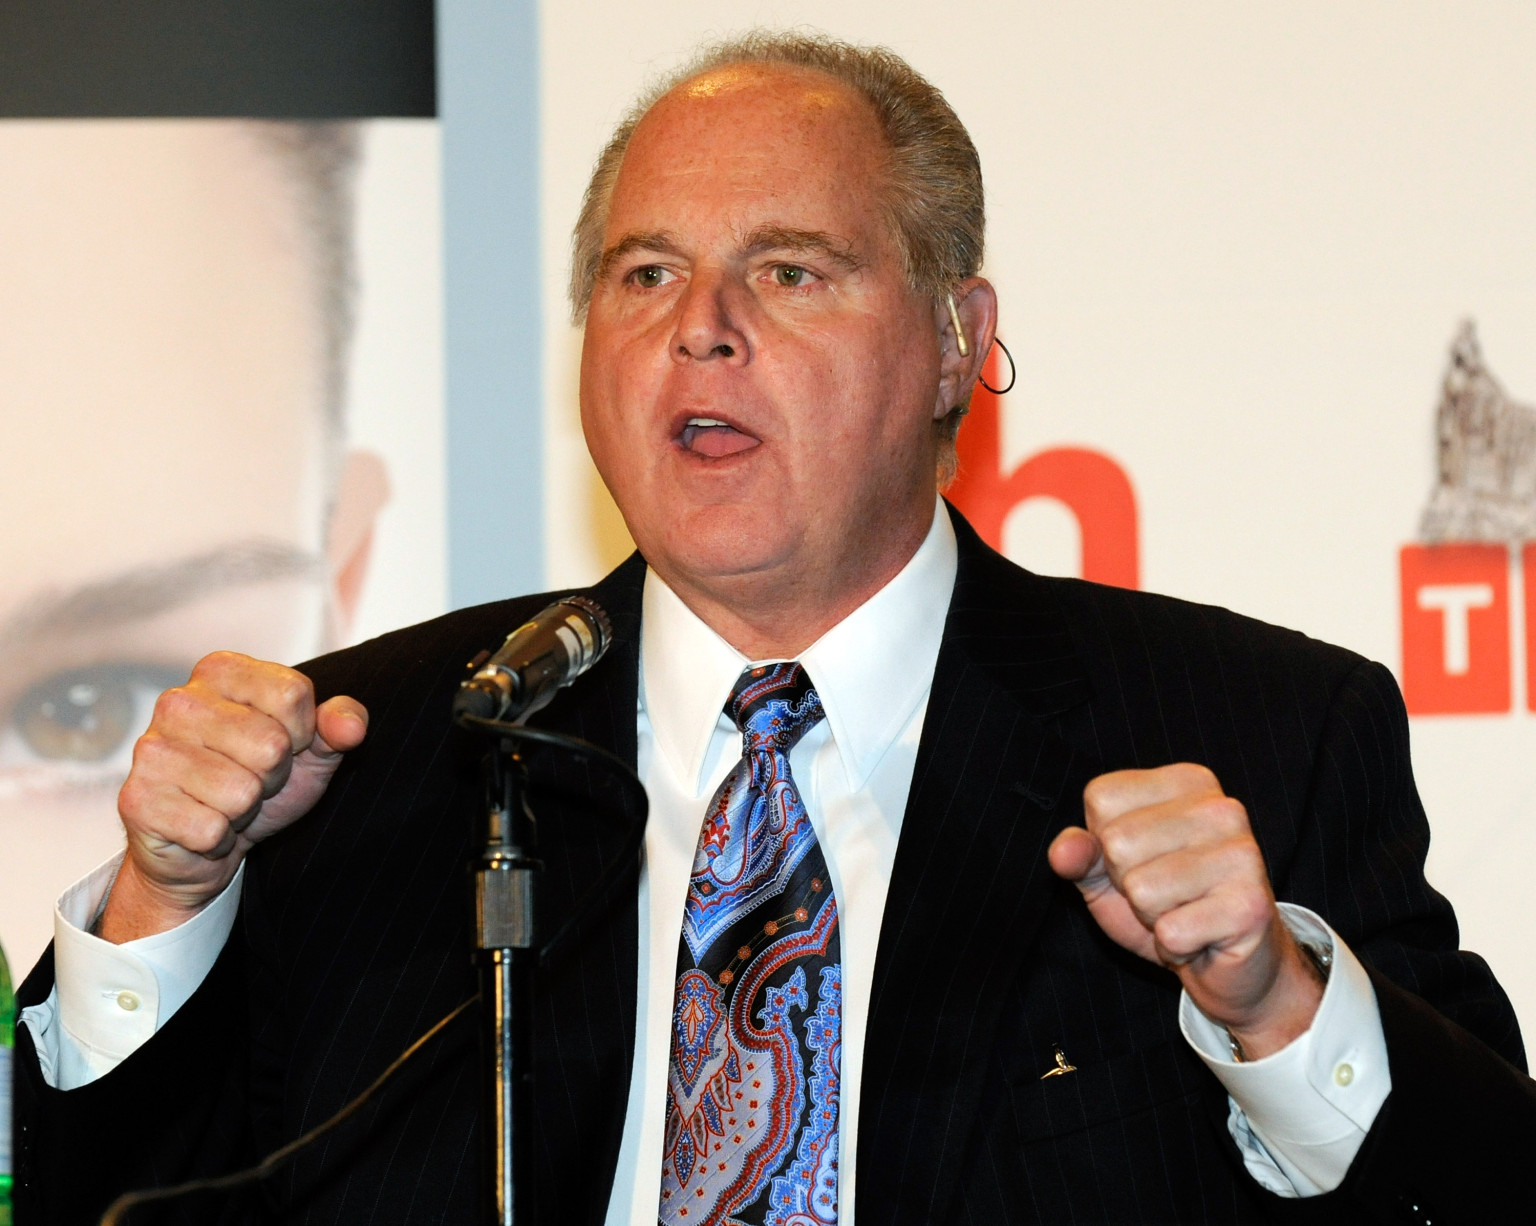 Rush Limbaugh: 'If You Believe In God ... You Cannot Believe In Man-Made Global ...